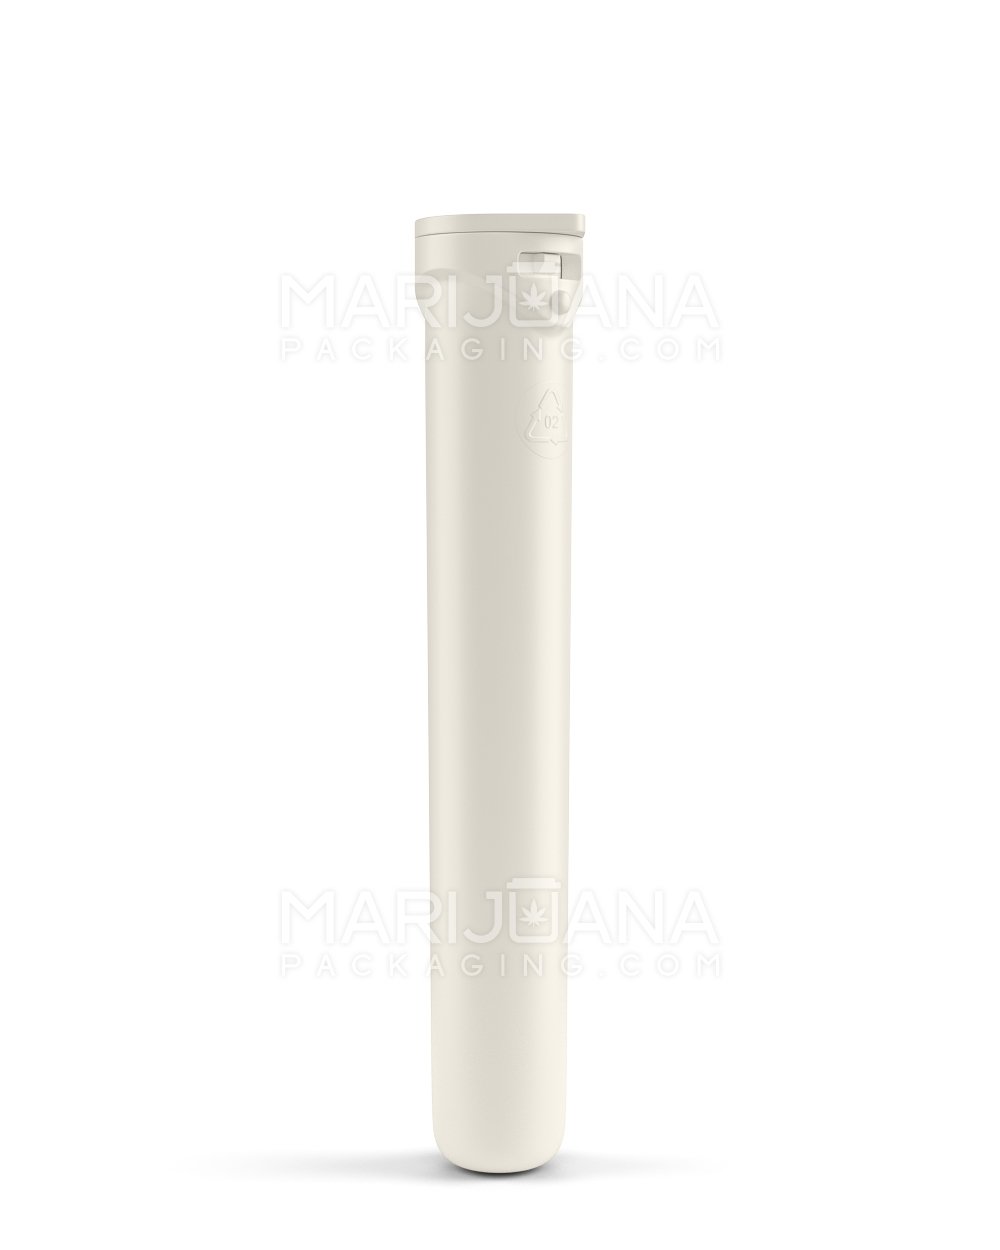 Child Resistant & Sustainable Recyclable "Line-up Arrow" Reclaimed Ocean Plastic Pre-Roll Tubes | 110mm - Beige | Sample - 1